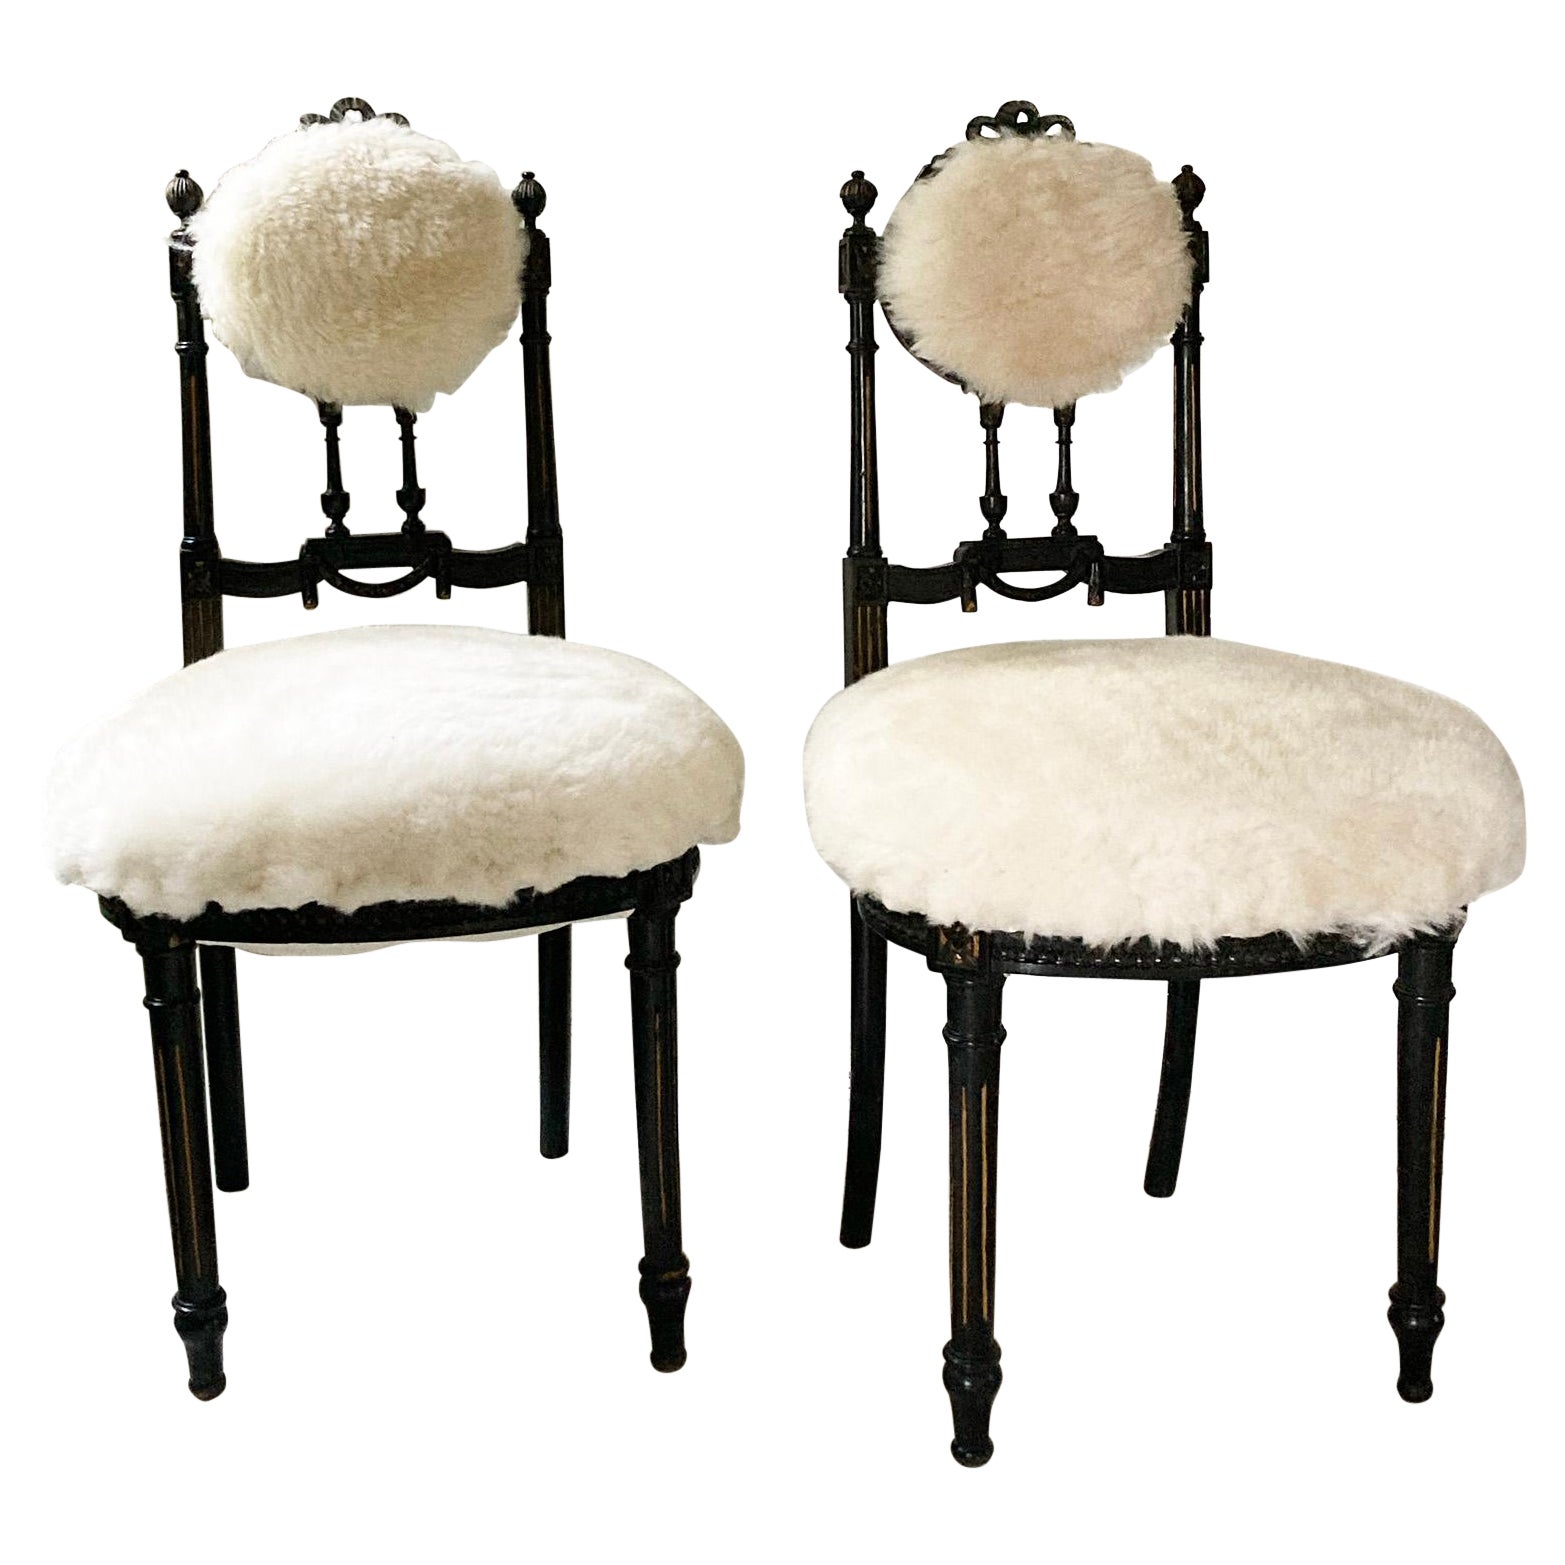 Fine Pair of Decorative Black Chairs with White Pure Wool , Sicily Italy 1920’s For Sale